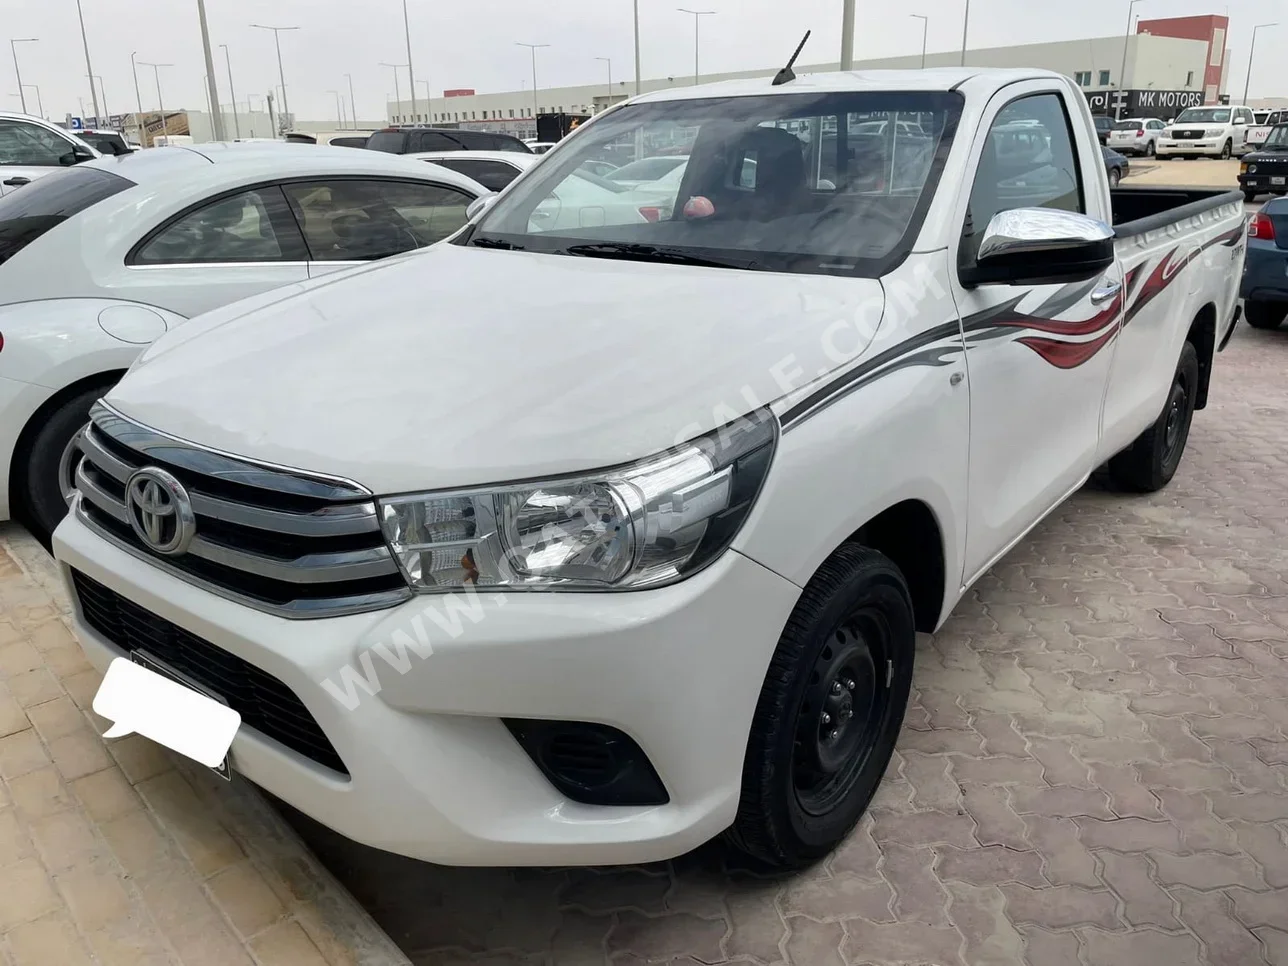 Toyota  Hilux  2021  Manual  142,000 Km  4 Cylinder  Four Wheel Drive (4WD)  Pick Up  White